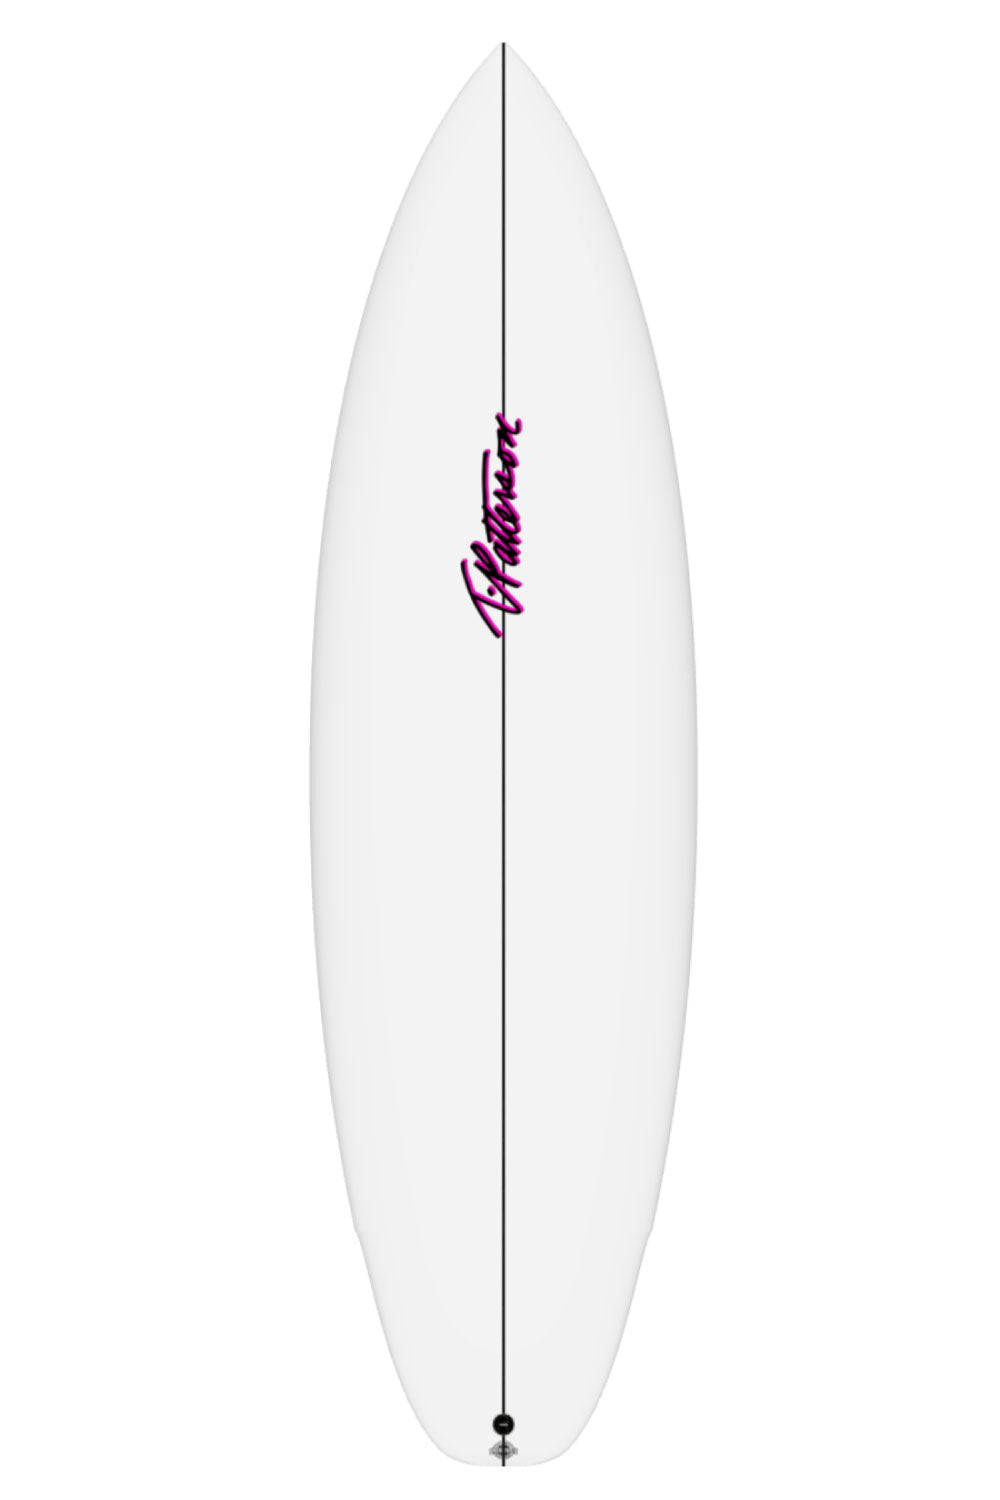 Timmy Patterson Synthetic 84 Surfboard